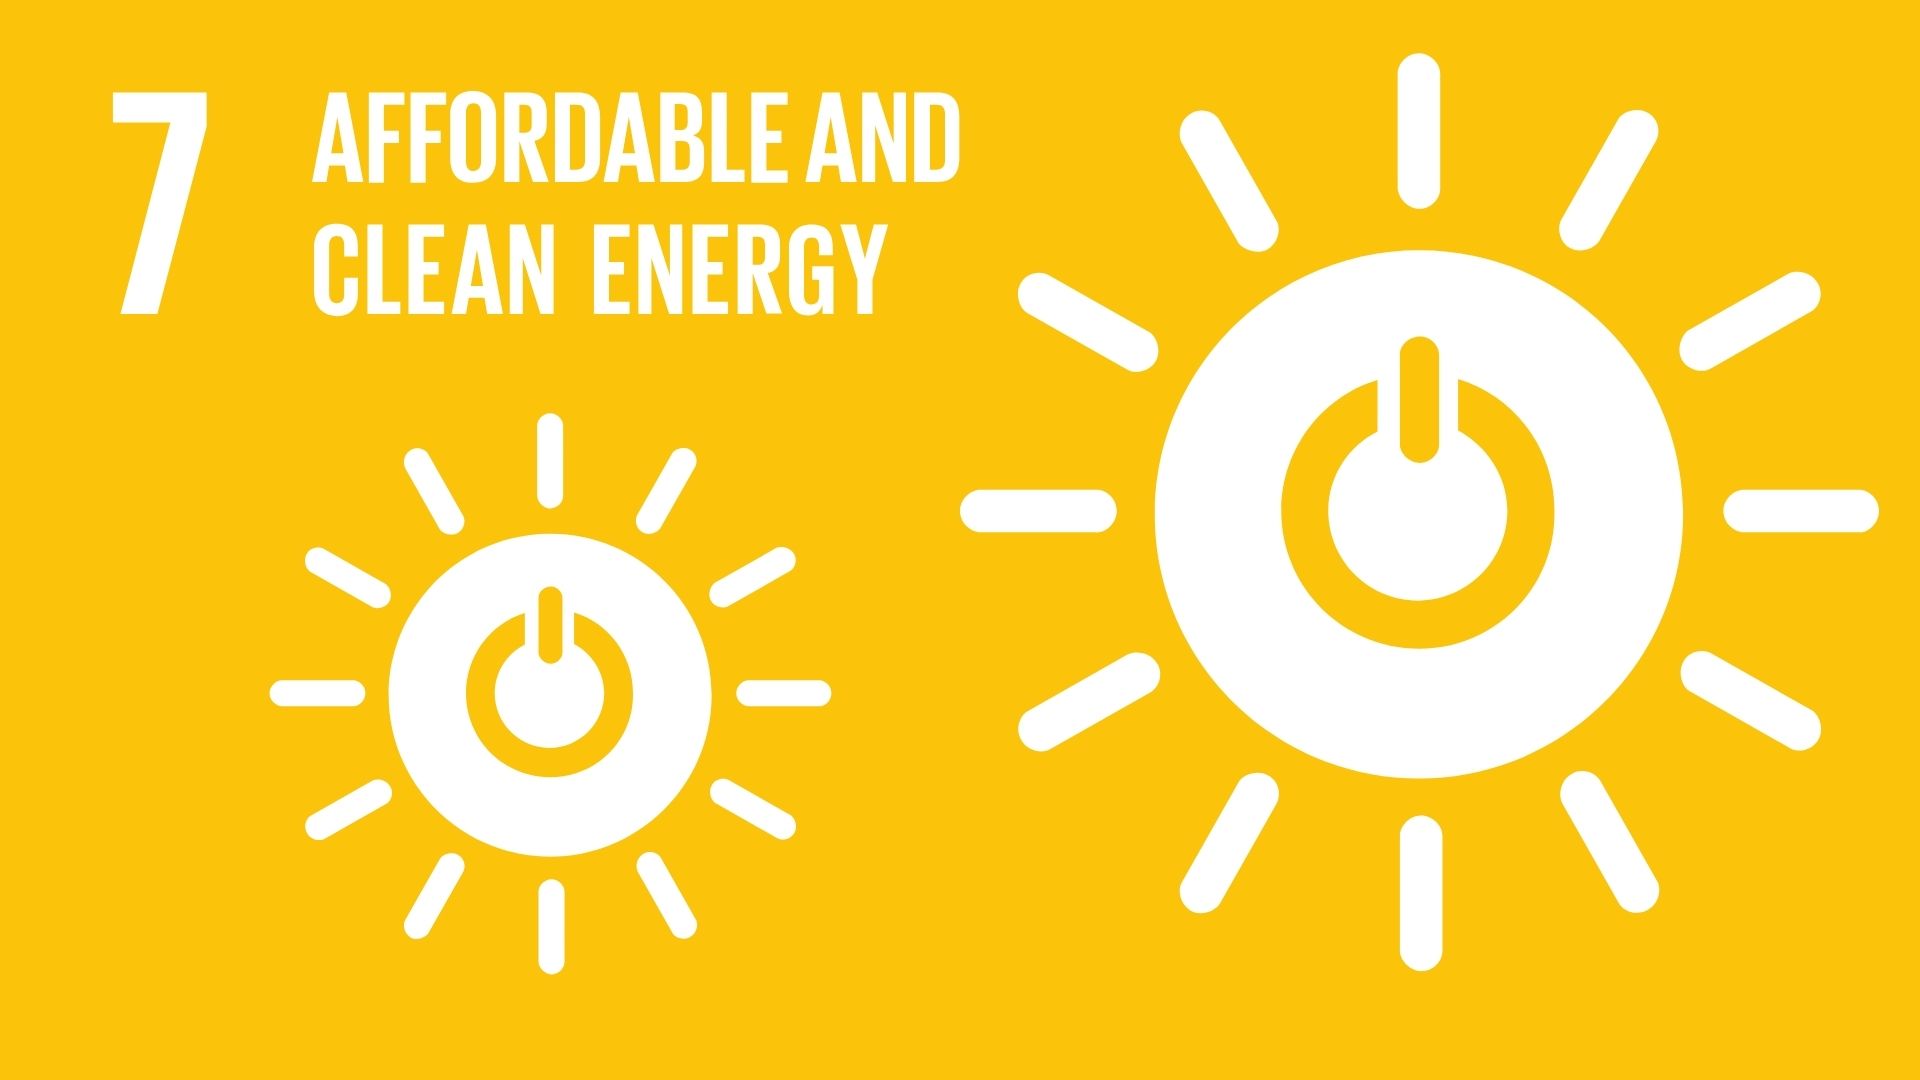 sdgs- Ensure access to affordable, reliable, sustainable and modern energy for all